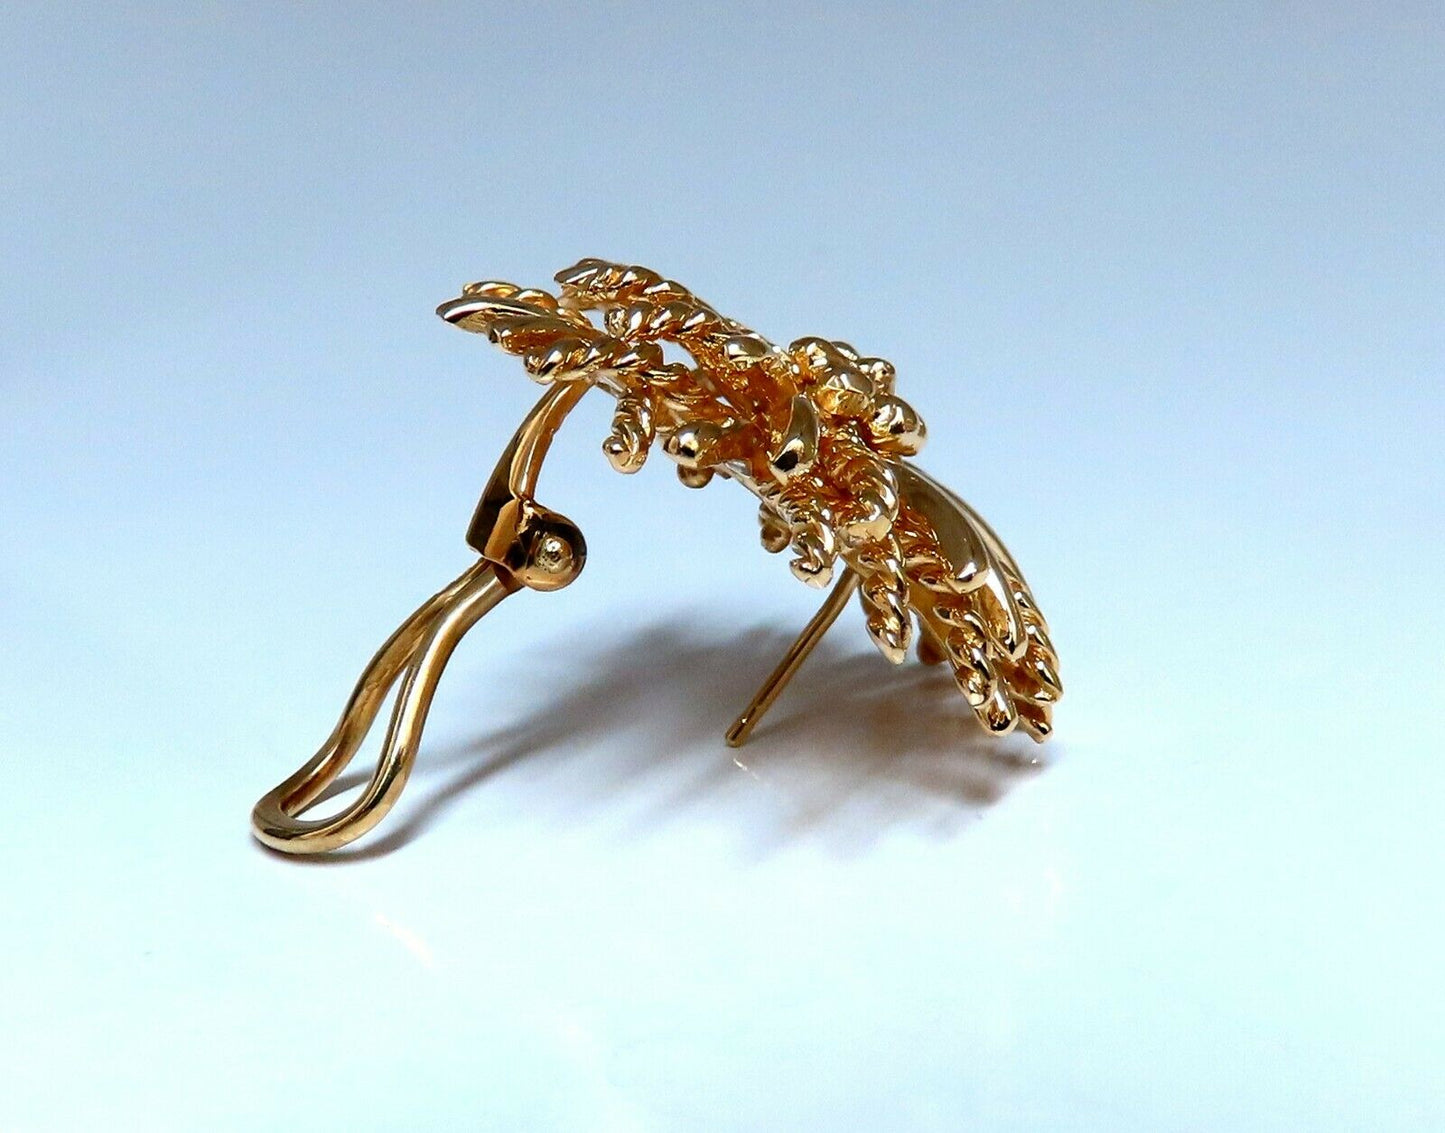 14kt Gold Blossoming Daisy 3D Clip Earrings